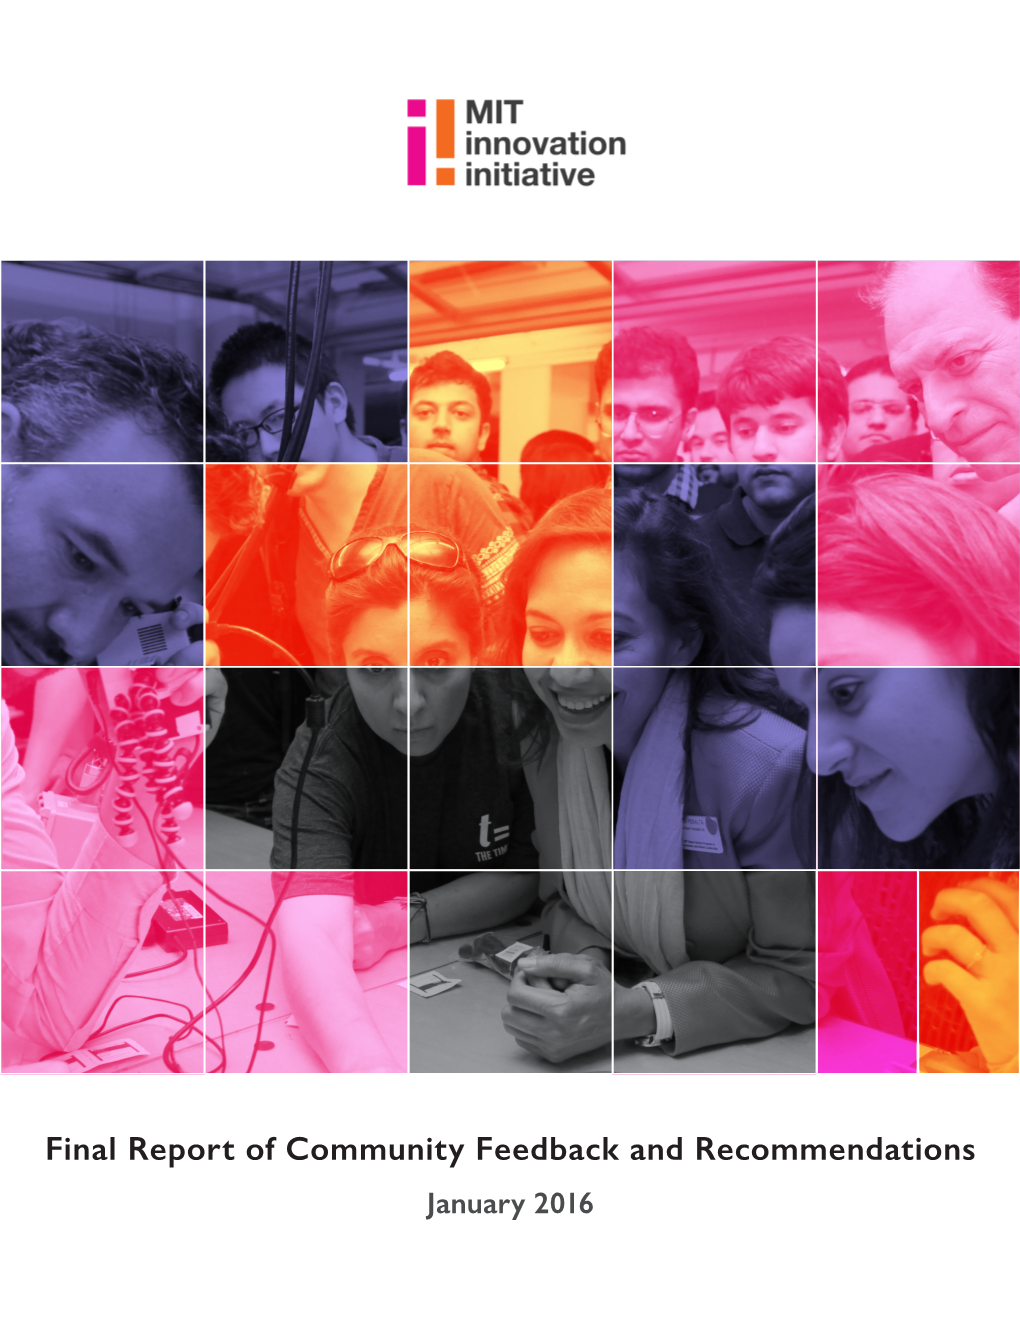 Final Report of Community Feedback and Recommendations January 2016 Final Report of Community Feedback and Recommendations | 2